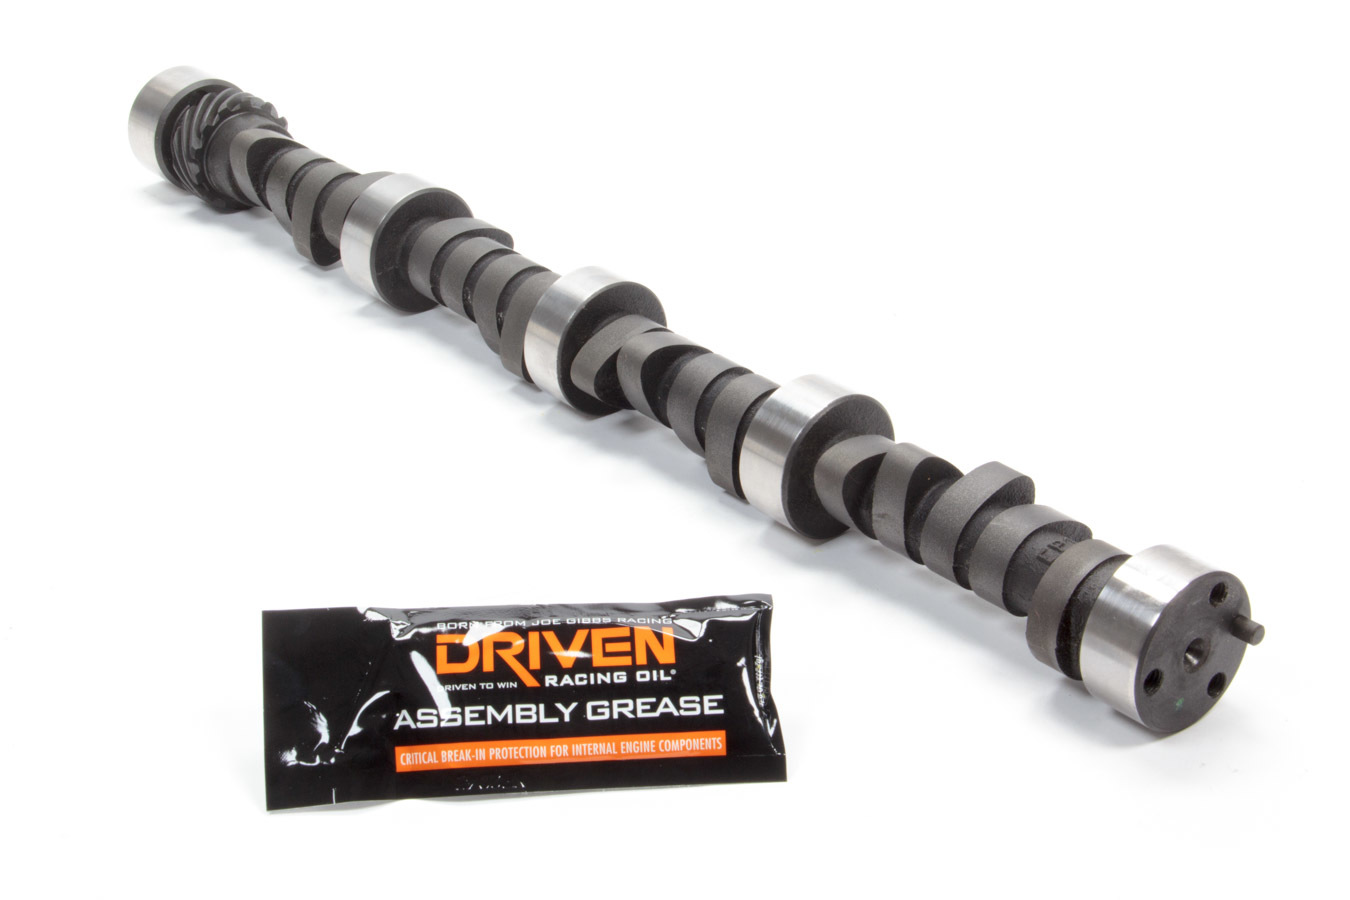 Howards Cams 110822-06 Camshaft, Mechanical Flat Tappet, Lift 0.540 / 0.560 in, Duration 280 / 287, 106 LSA, 3000 / 7200 RPM, Small Block Chevy, Each